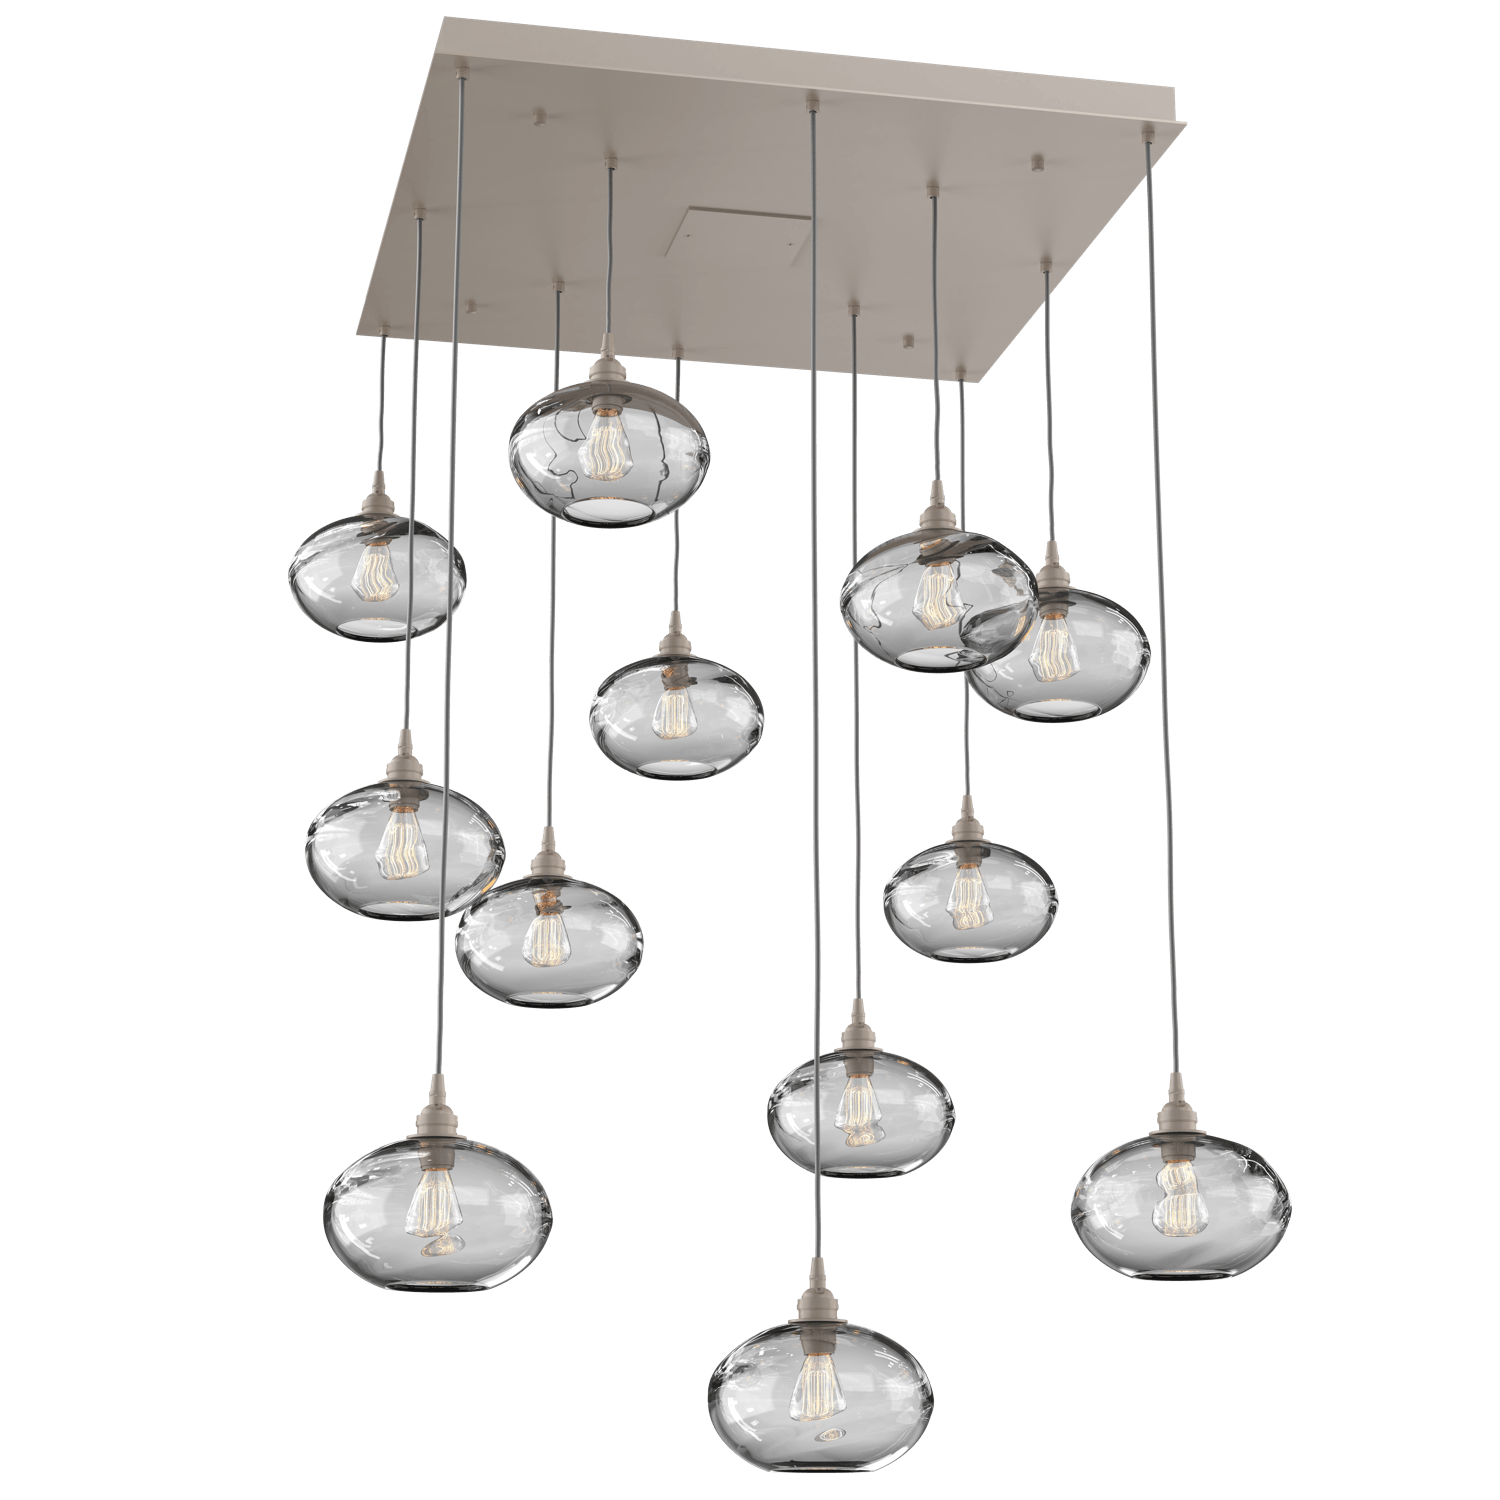 CHB0036-12-BS-OC-Hammerton-Studio-Optic-Blown-Glass-Coppa-12-light-square-pendant-chandelier-with-metallic-beige-silver-finish-and-optic-clear-blown-glass-shades-and-incandescent-lamping